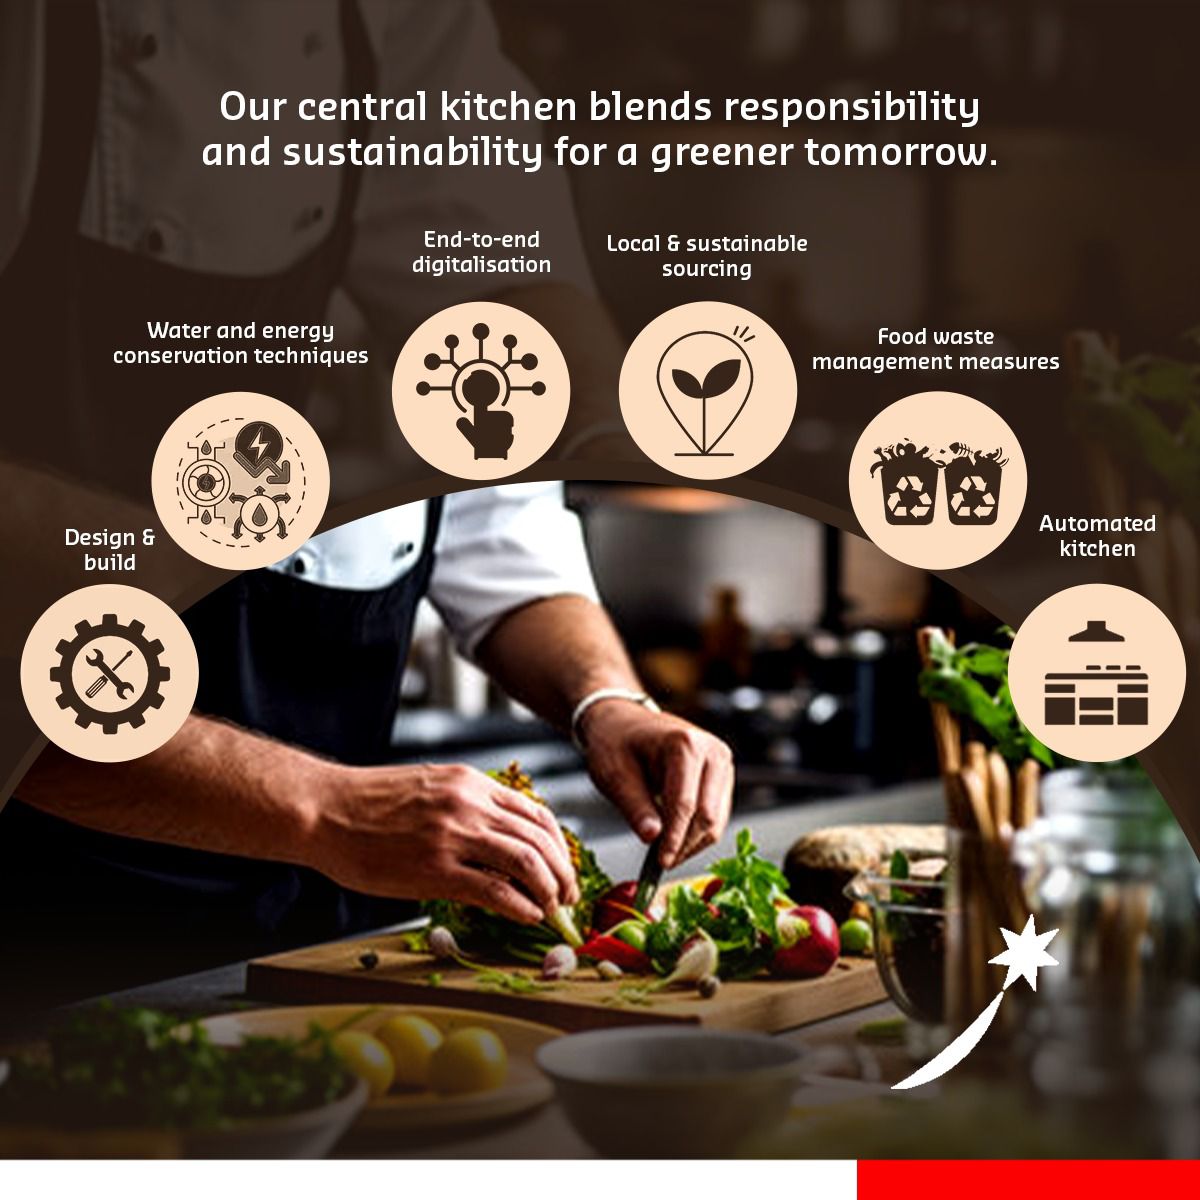 Sodexo prioritizes sustainability with a circular economy approach, reducing emissions and waste. Emphasizing local, sustainable ingredients, supporting employee well-being. Good for you, good for the planet! Know more: bit.ly/3rkIhdf #Sodexo #SodexoIndia